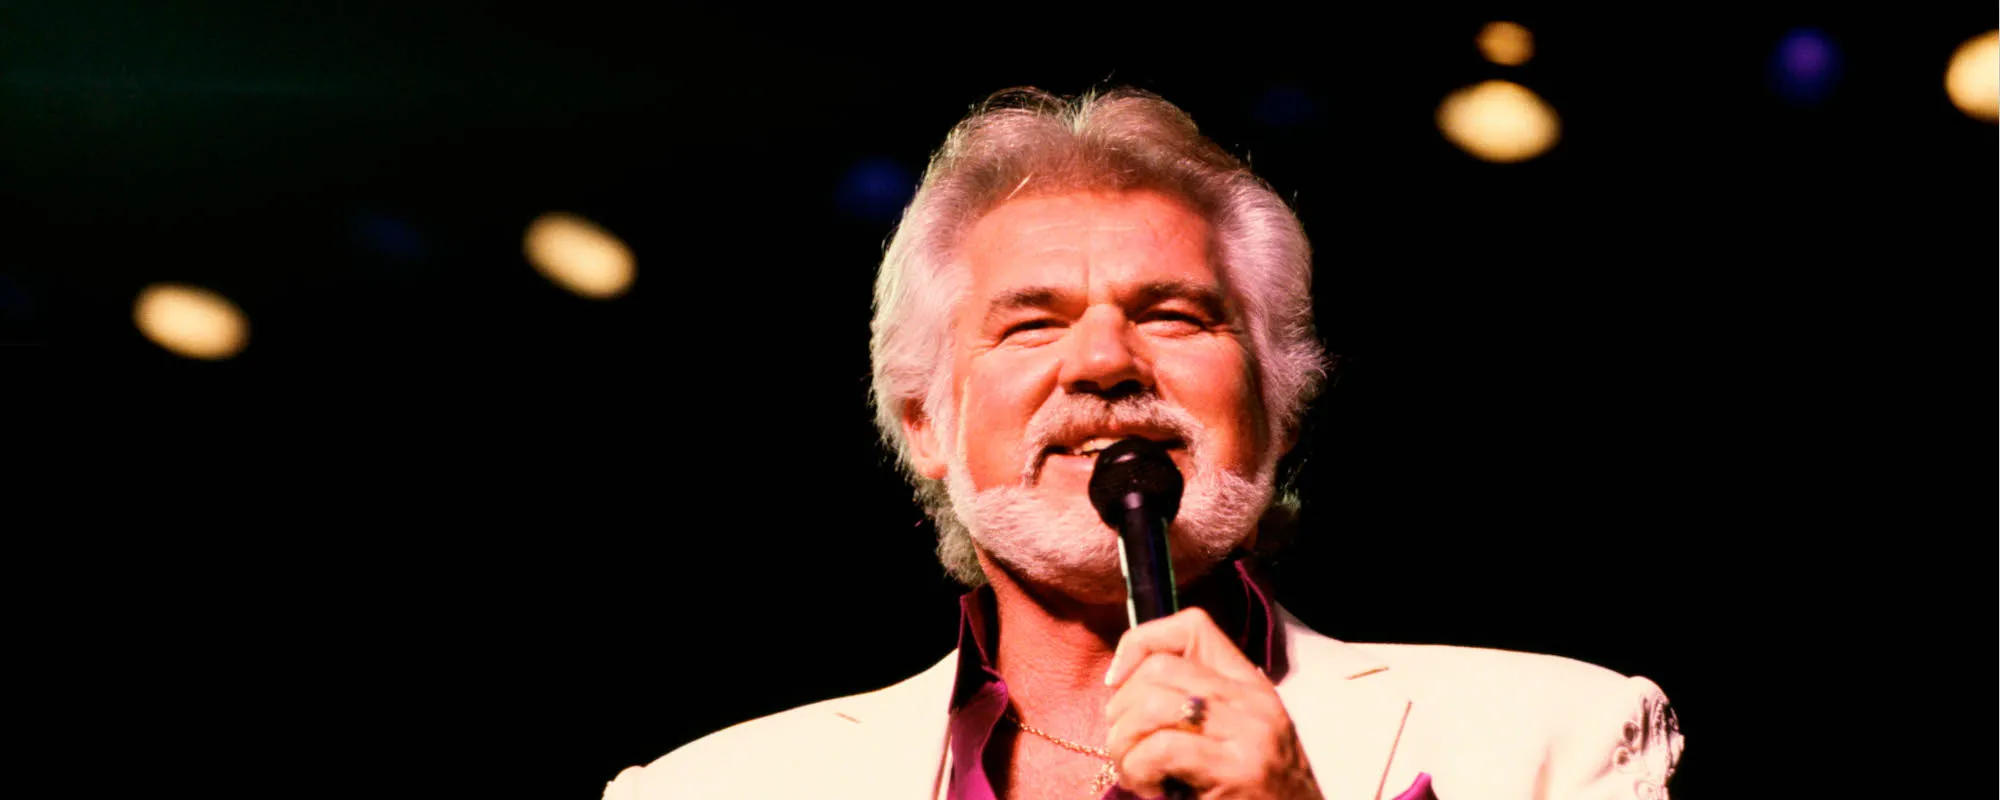 Kenny Rogers’ Wife, Wanda, Curates First Posthumous Album ‘Life Is Like A Song’